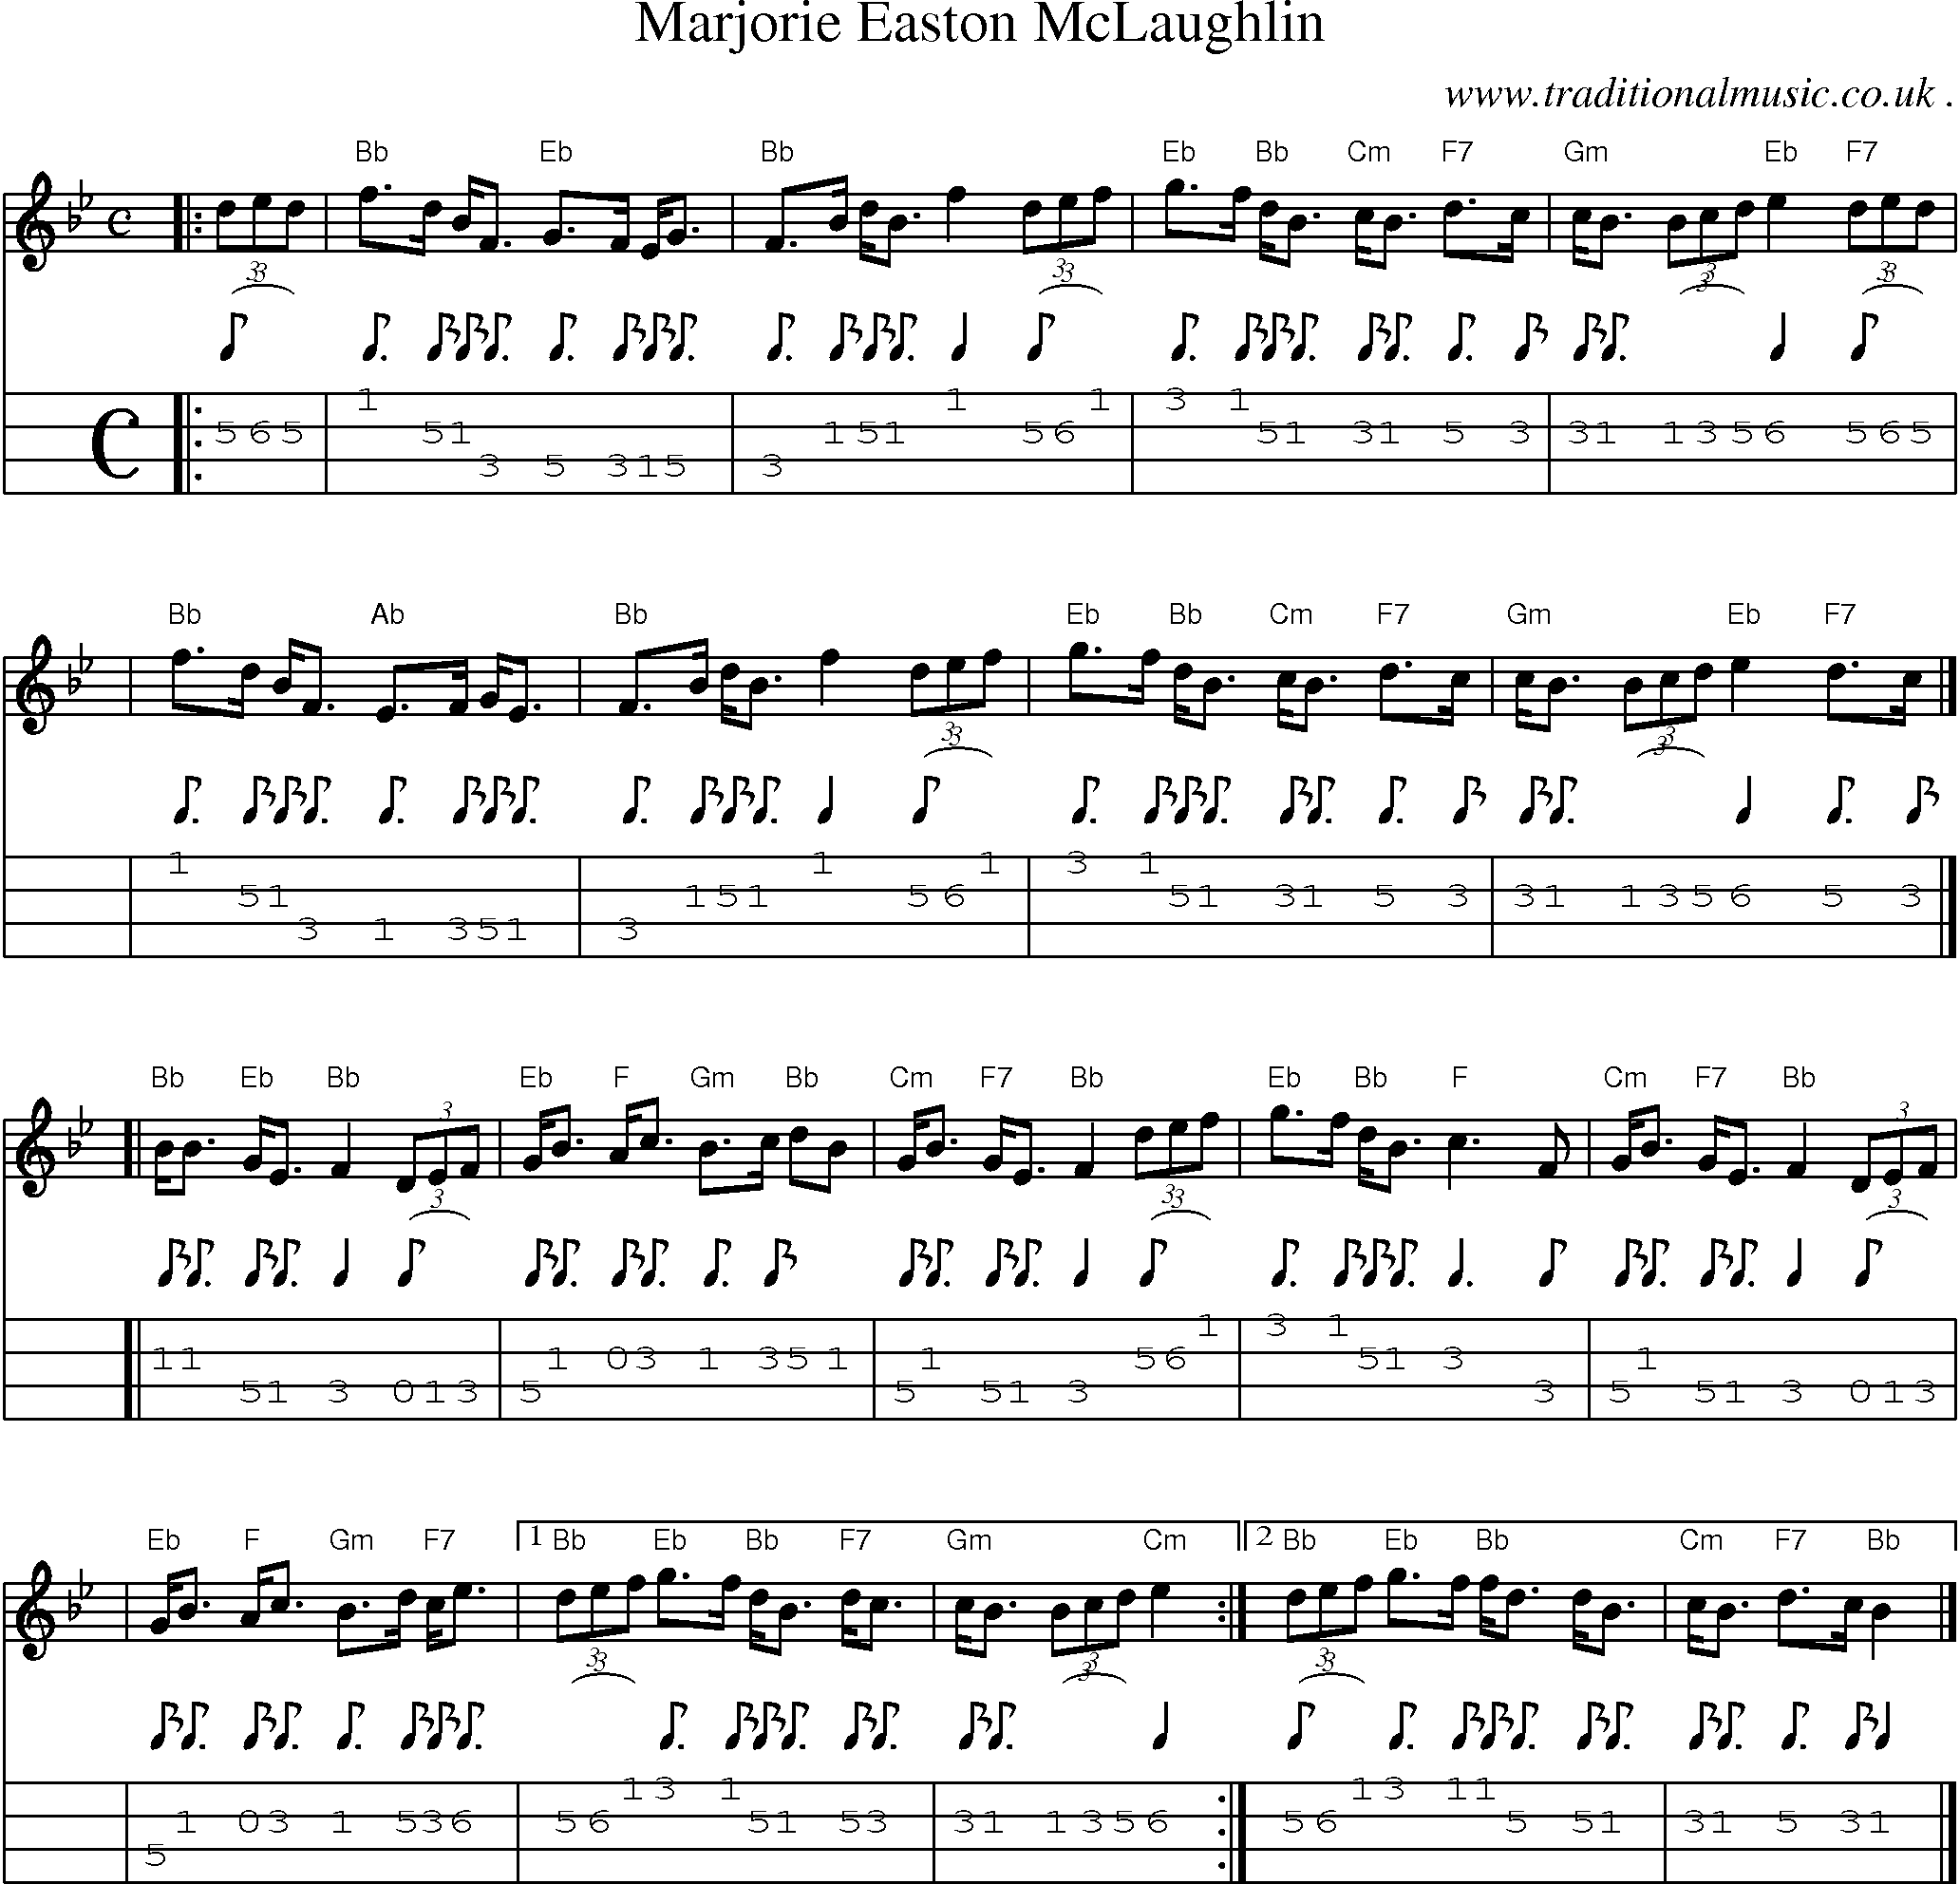 Sheet-music  score, Chords and Mandolin Tabs for Marjorie Easton Mclaughlin